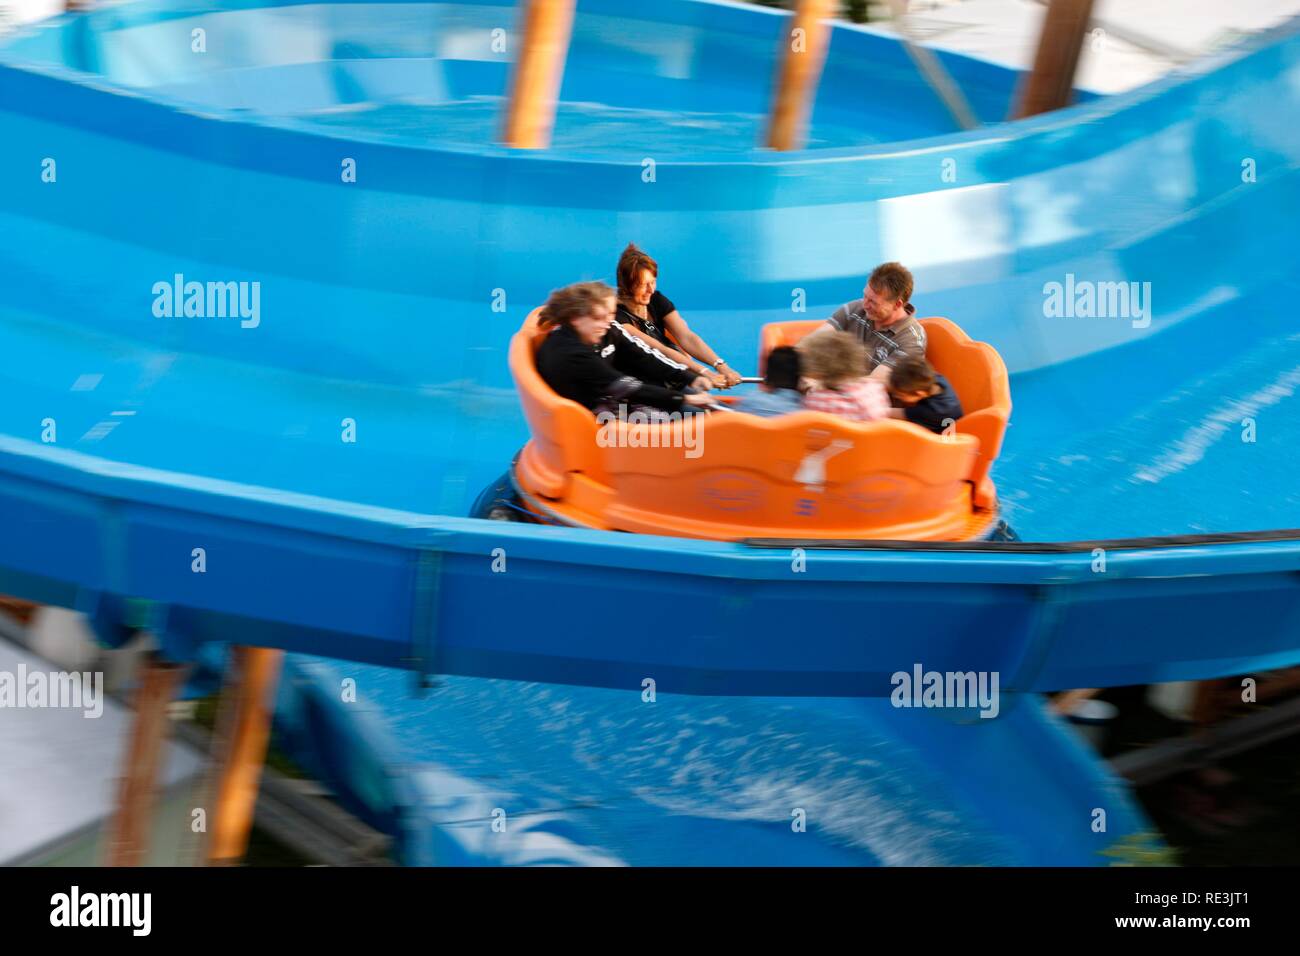 German Theme Fair High Resolution Stock Photography and Images - Alamy